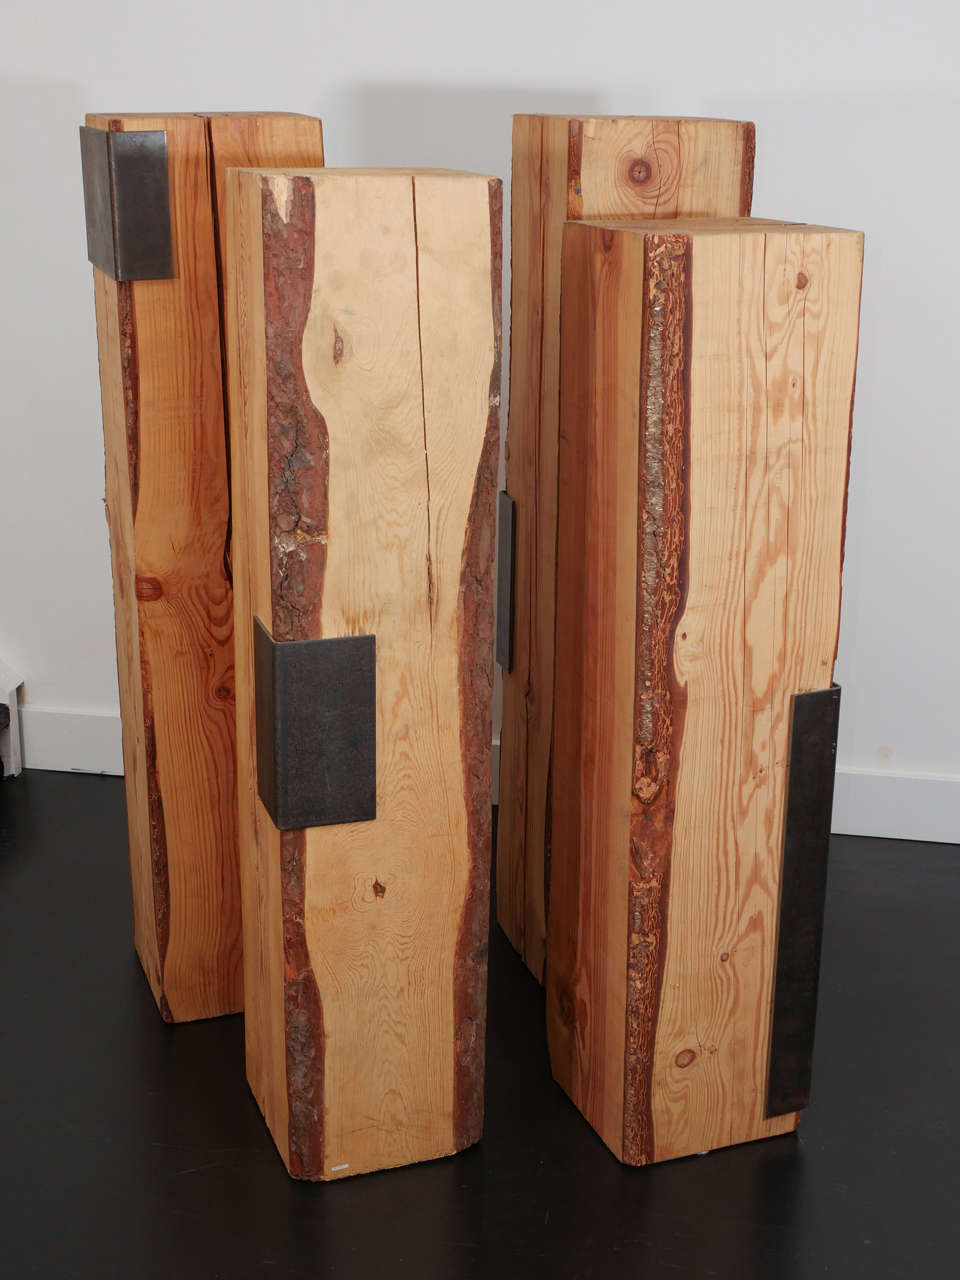 Sculptural pedestals by design duo Garouste and Bonetti, produced by Cat Berro. Raw pine with iron details. The pedestals were used to display silver pieces by Franco-Russian object designer Goudji in Orleans. Very strong presence and art pieces on